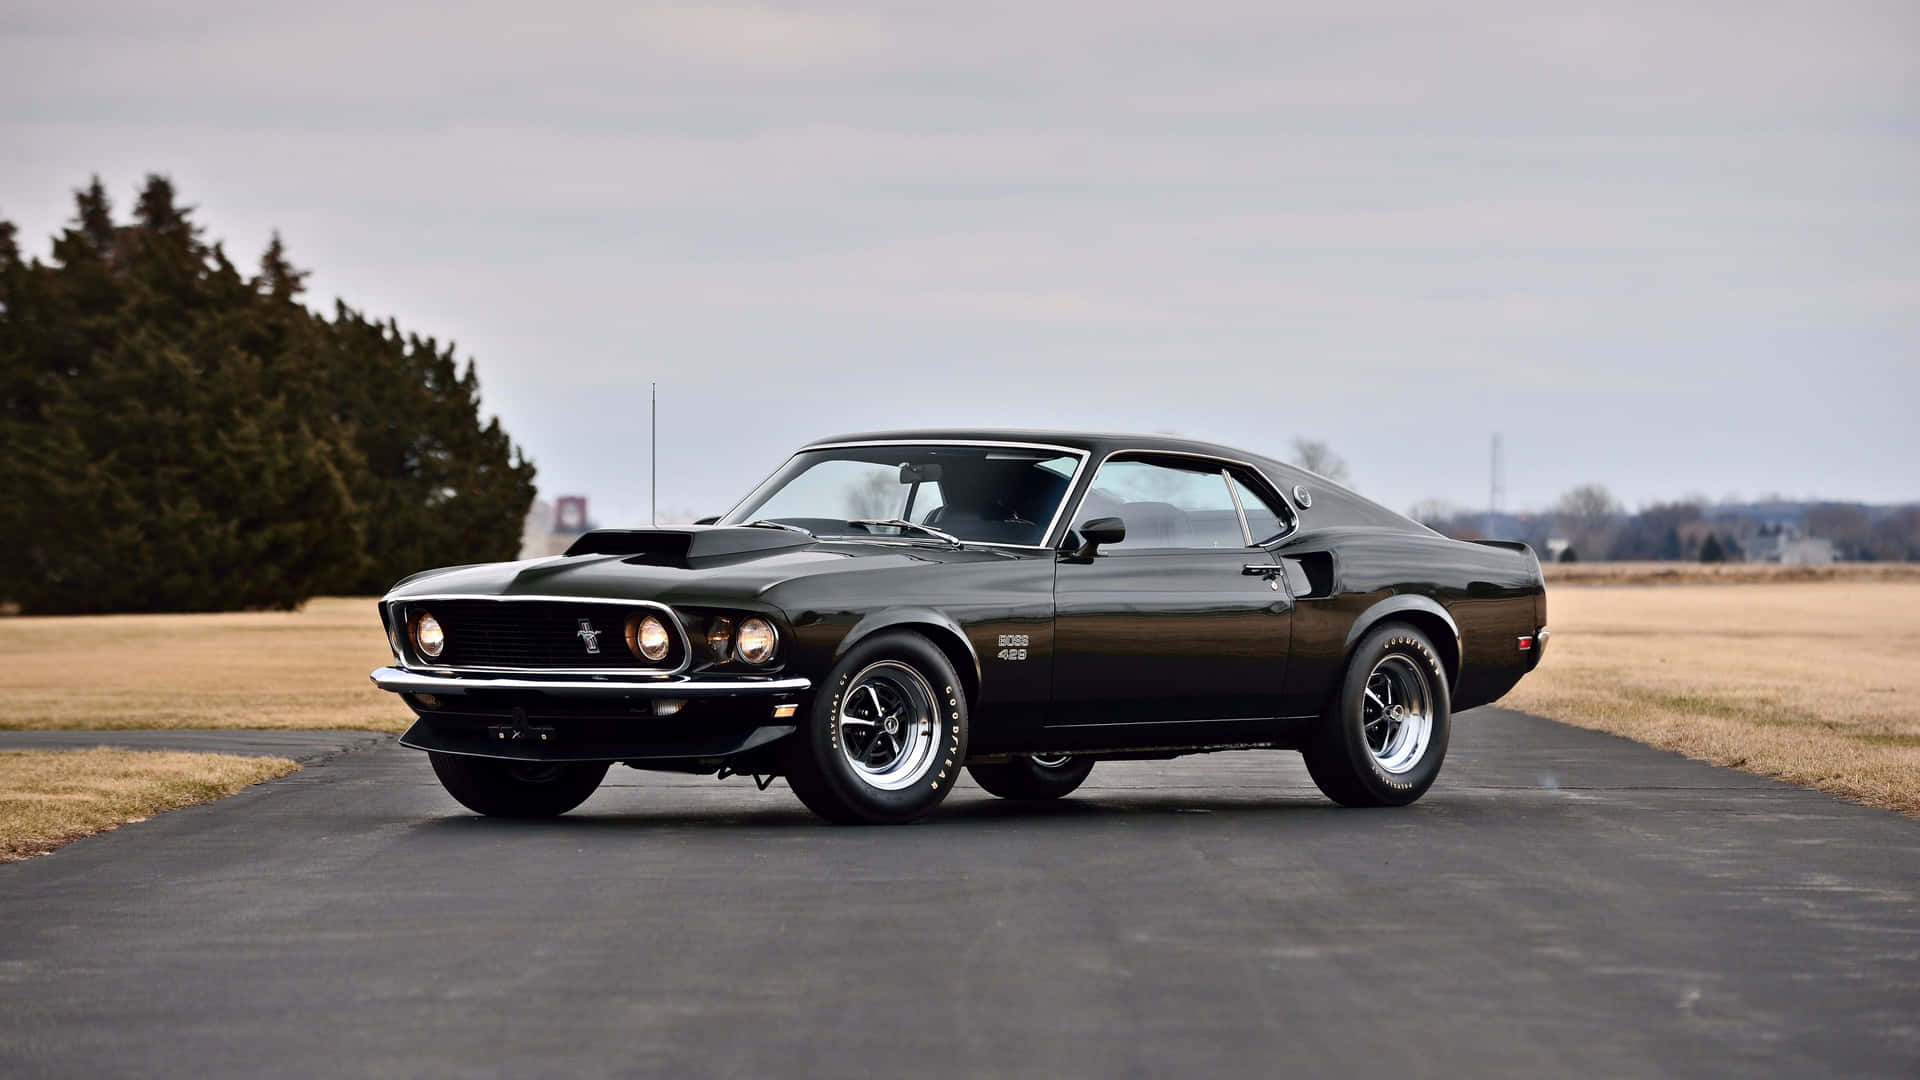 Powerful Ford Mustang Mach 1 cruising the street Wallpaper